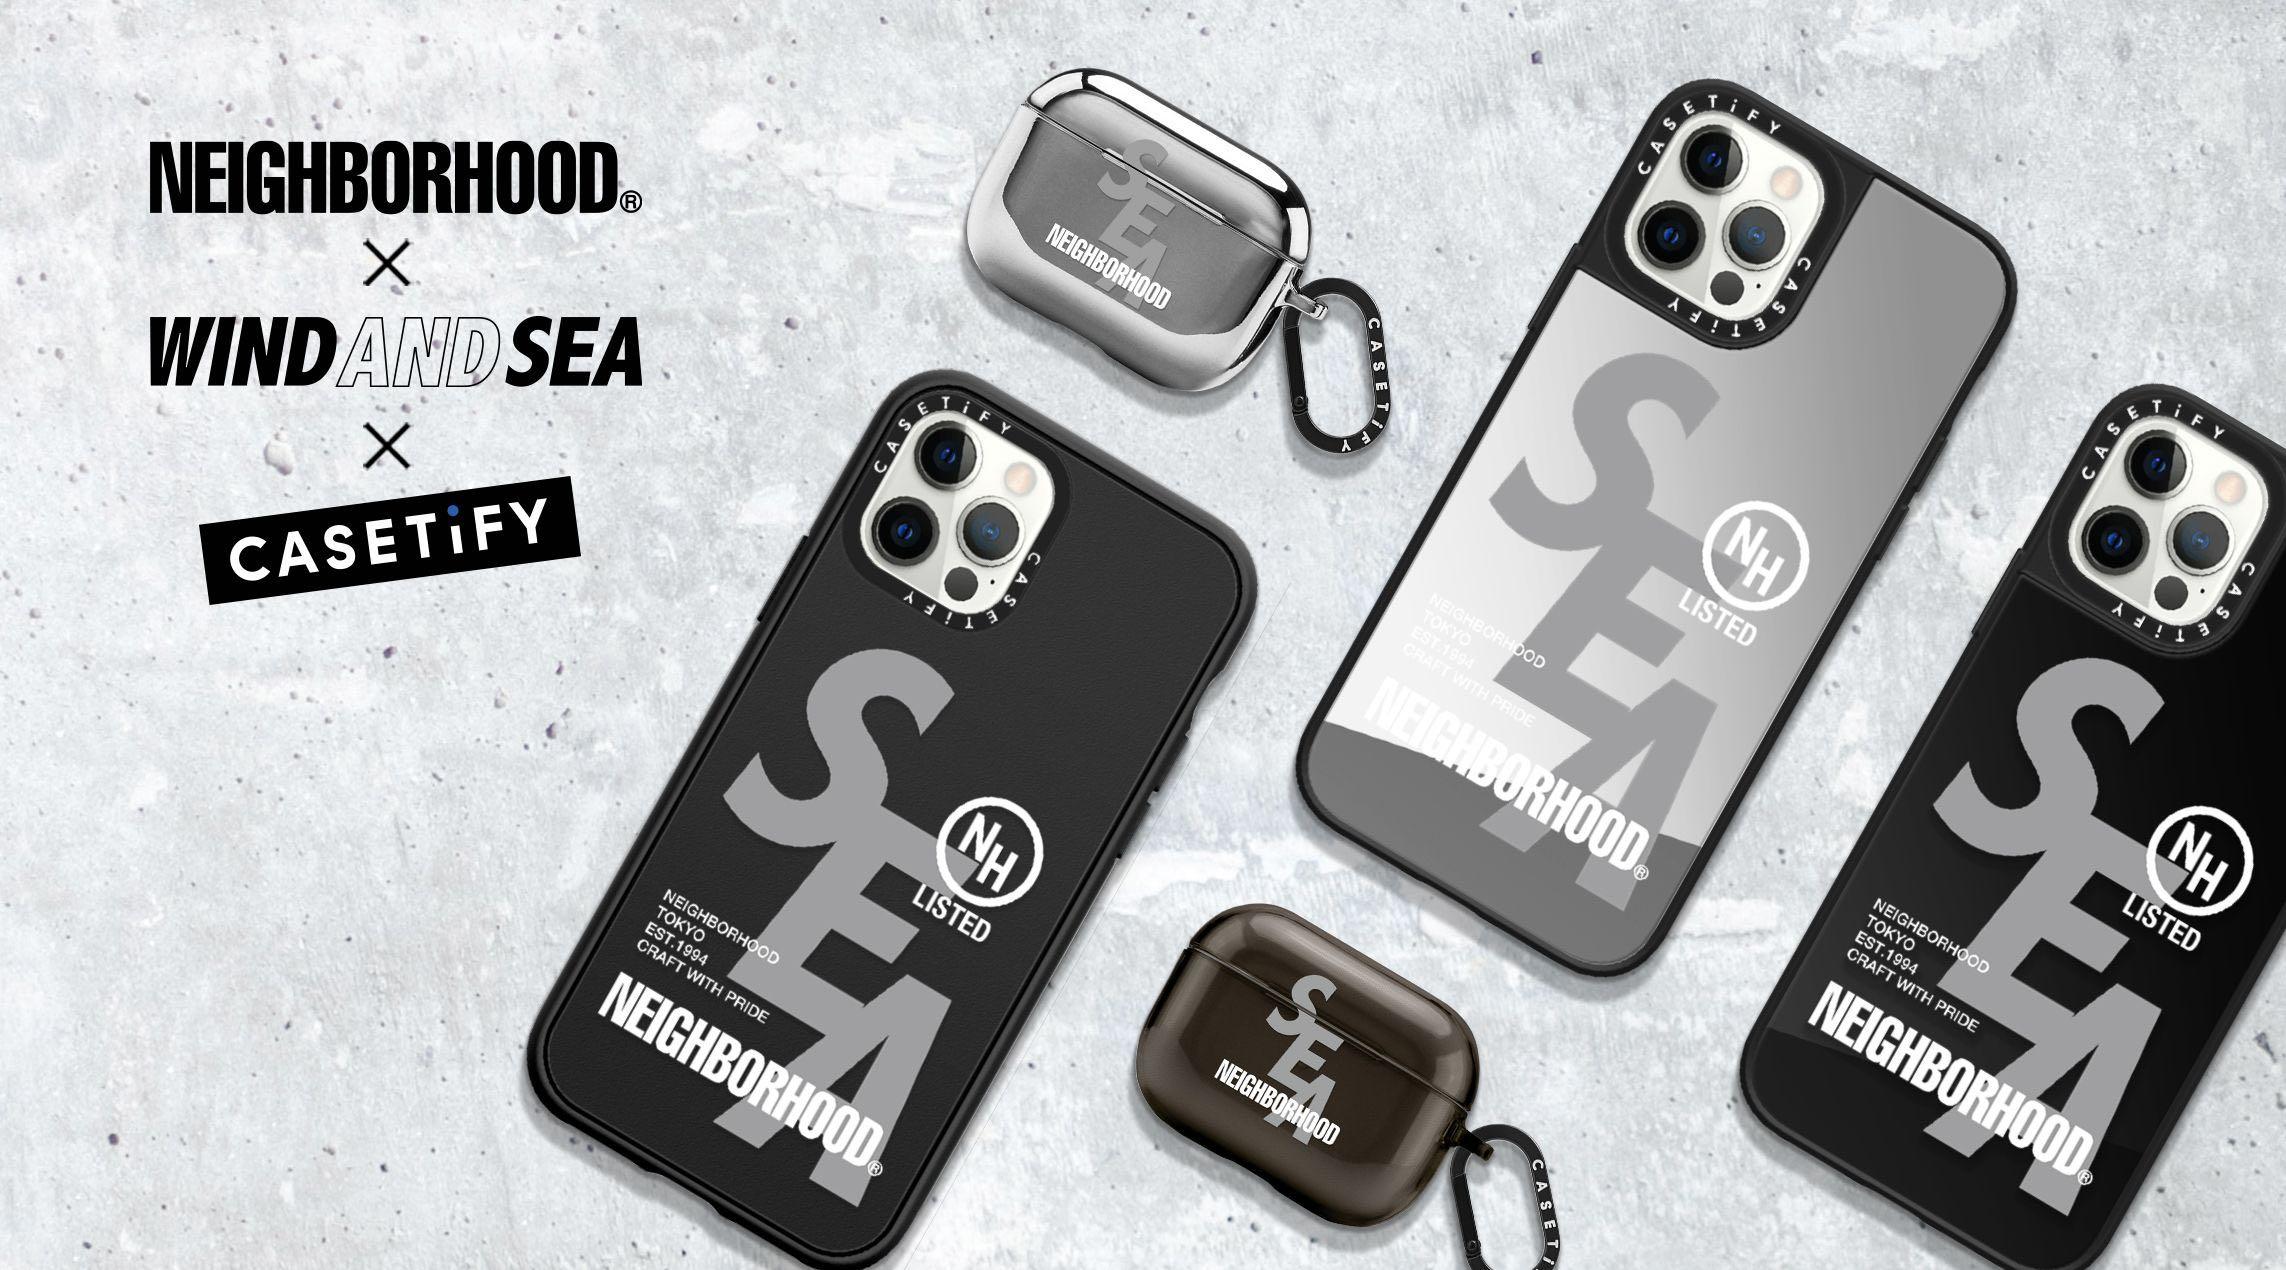 WIND AND SEA Casetify NBHD AirPods Case